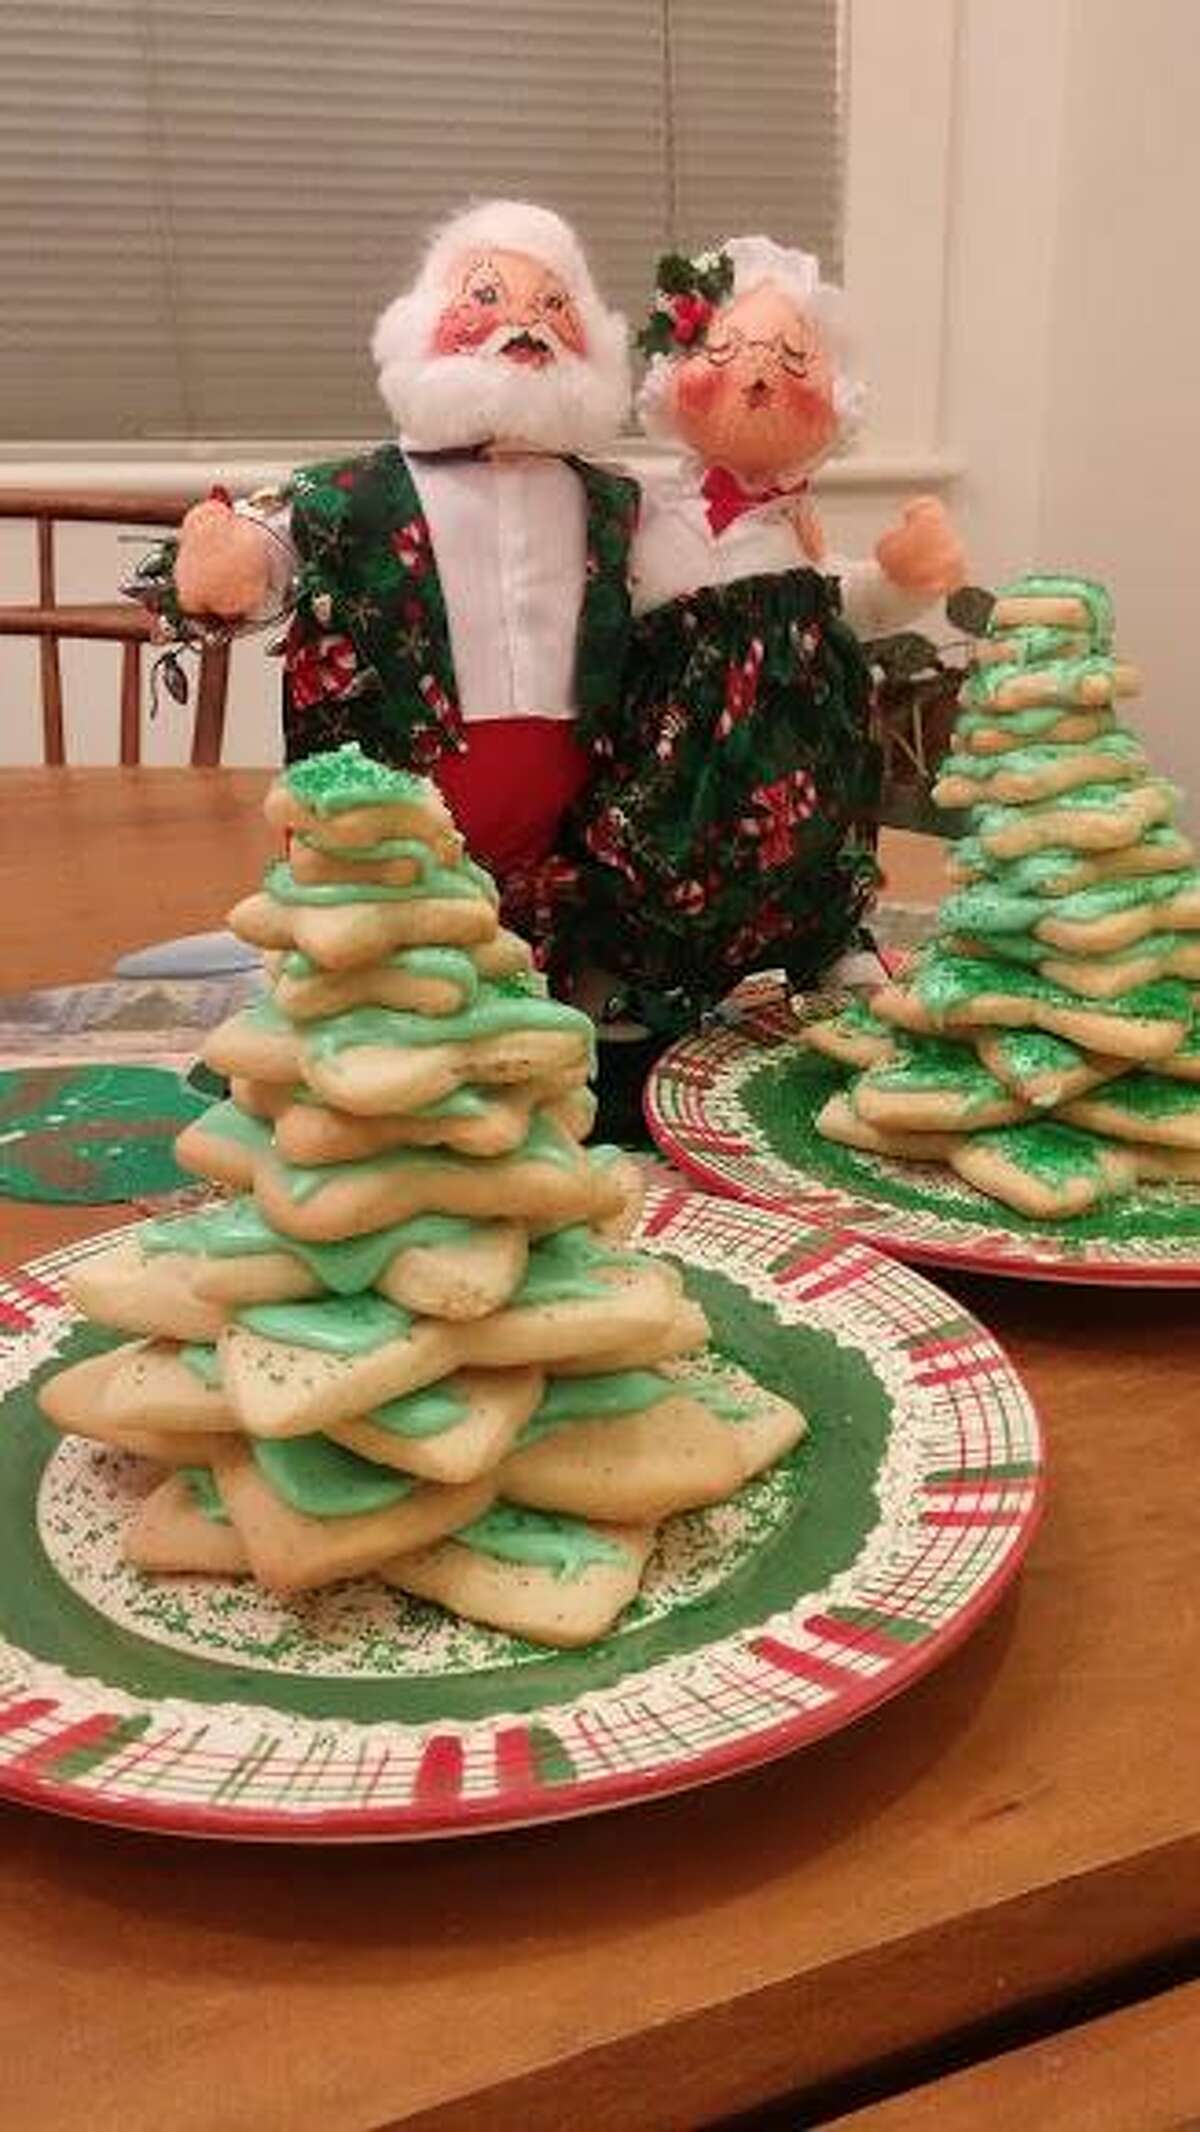 Frank Whitman explores the wonderful world of Christmas cookies. Here are some cookie Christmas trees.